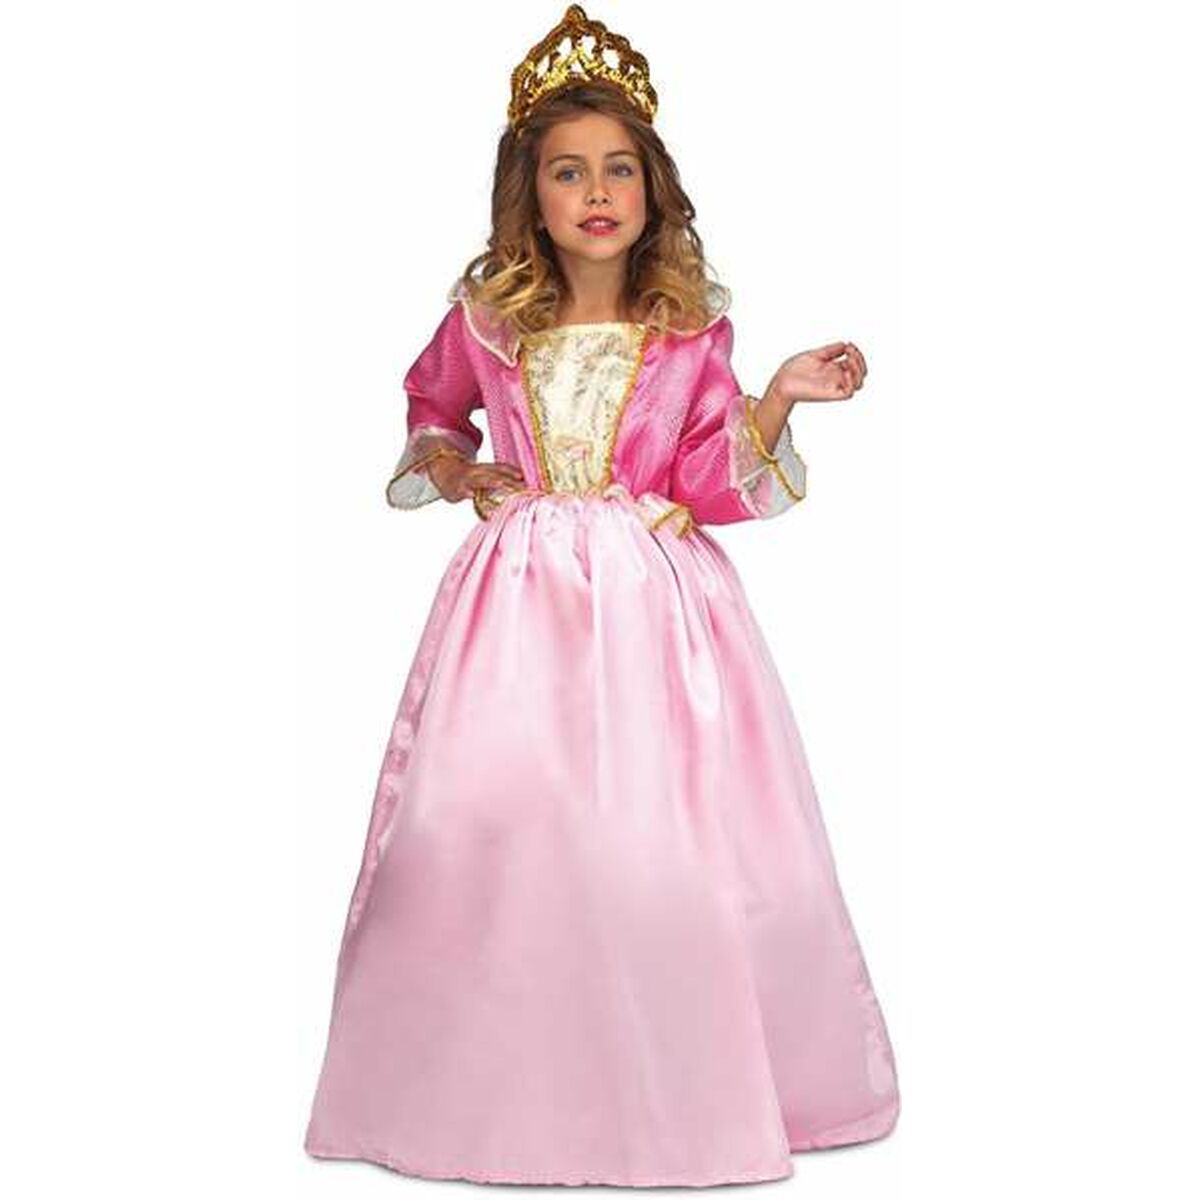 Costume for Children My Other Me Light Pink Princess 2 Pieces